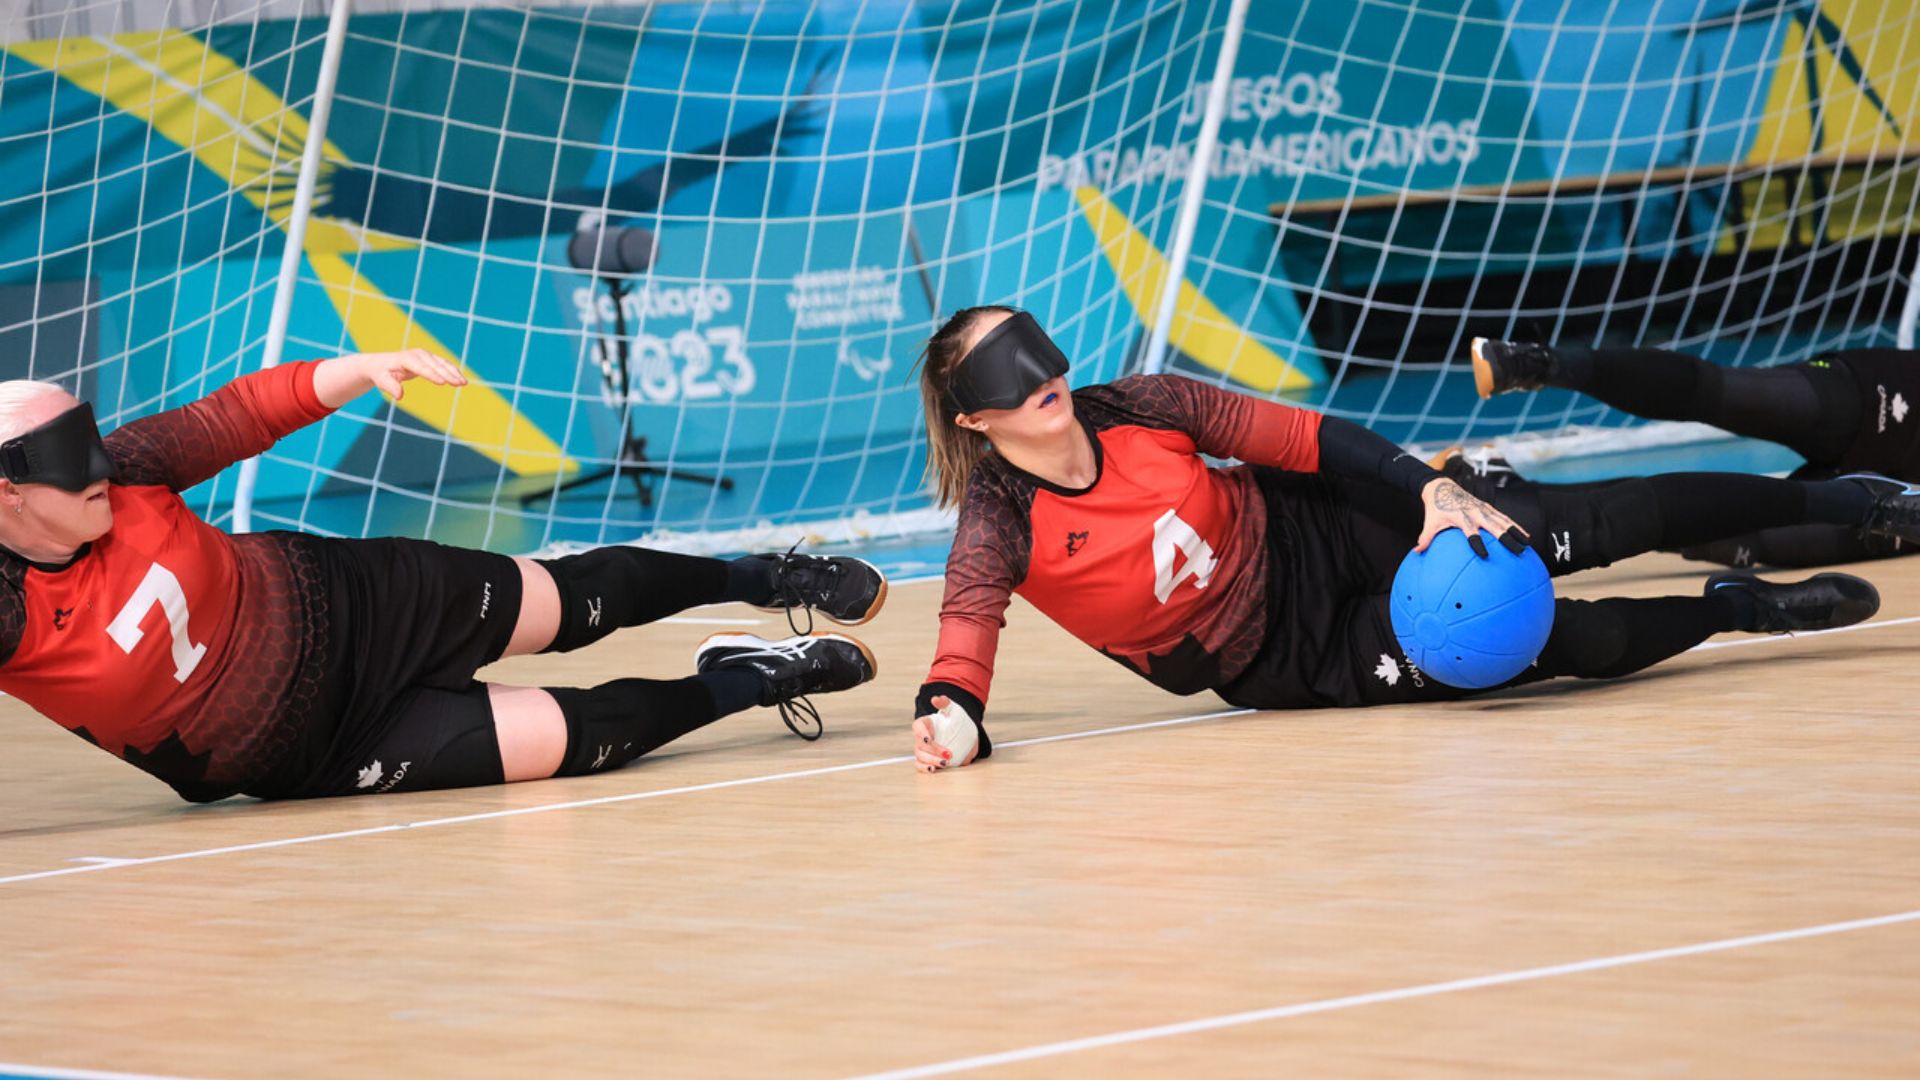 Canada Defeats Mexico: Will Play Semifinals Against Brazil in Female's Goalball